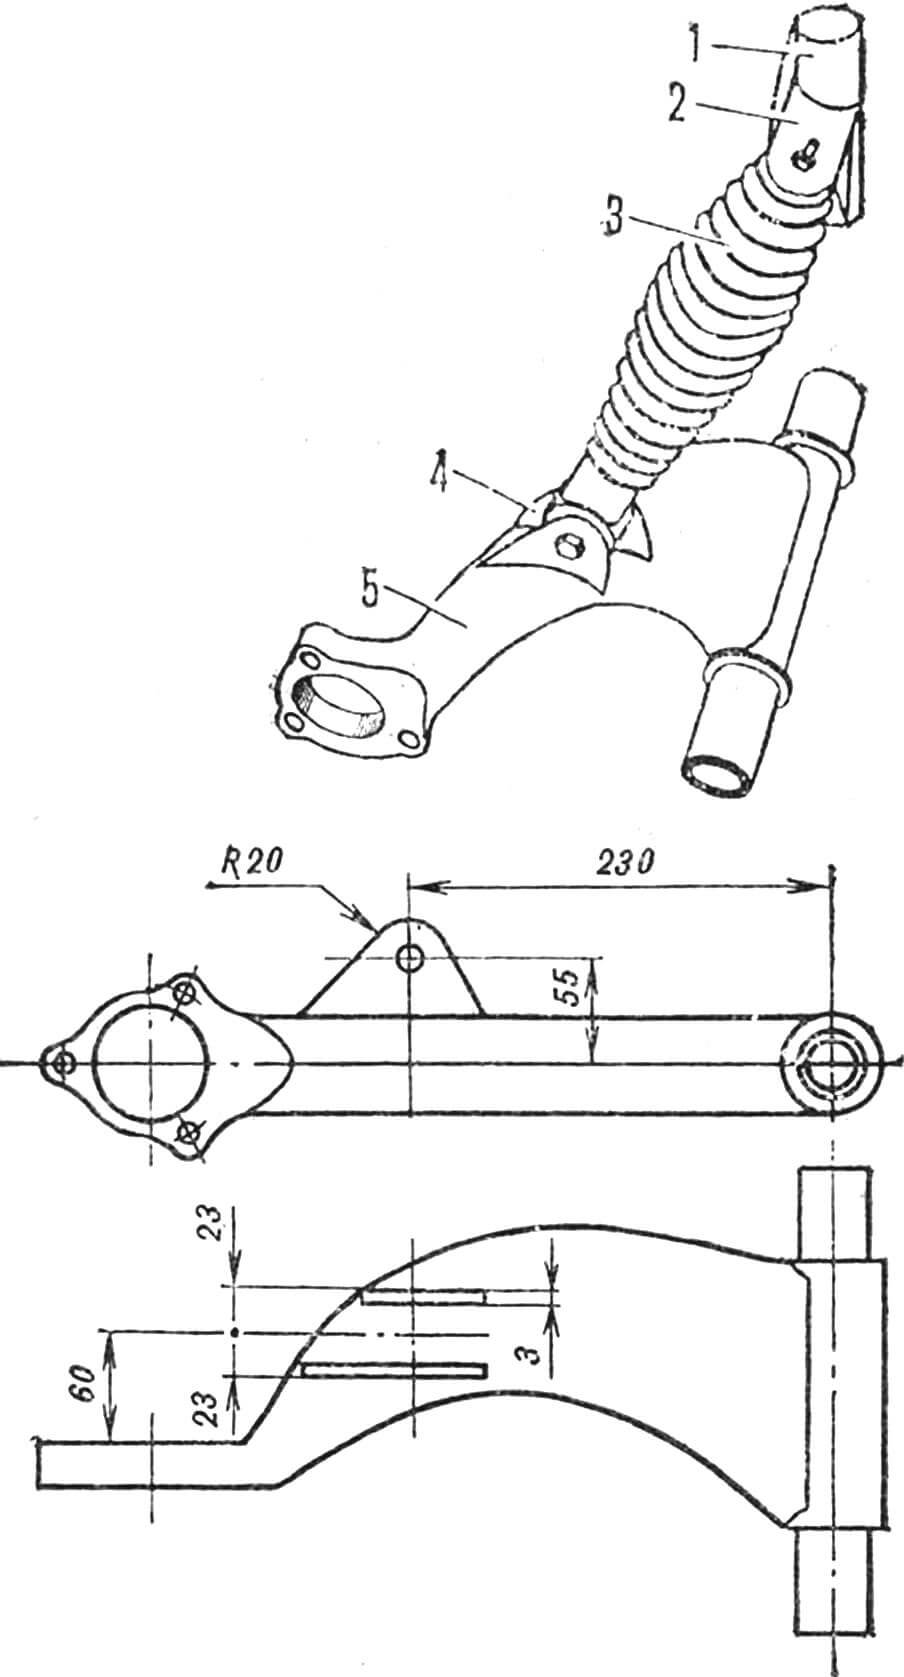 Fig. 5. Rear suspension lever assembly